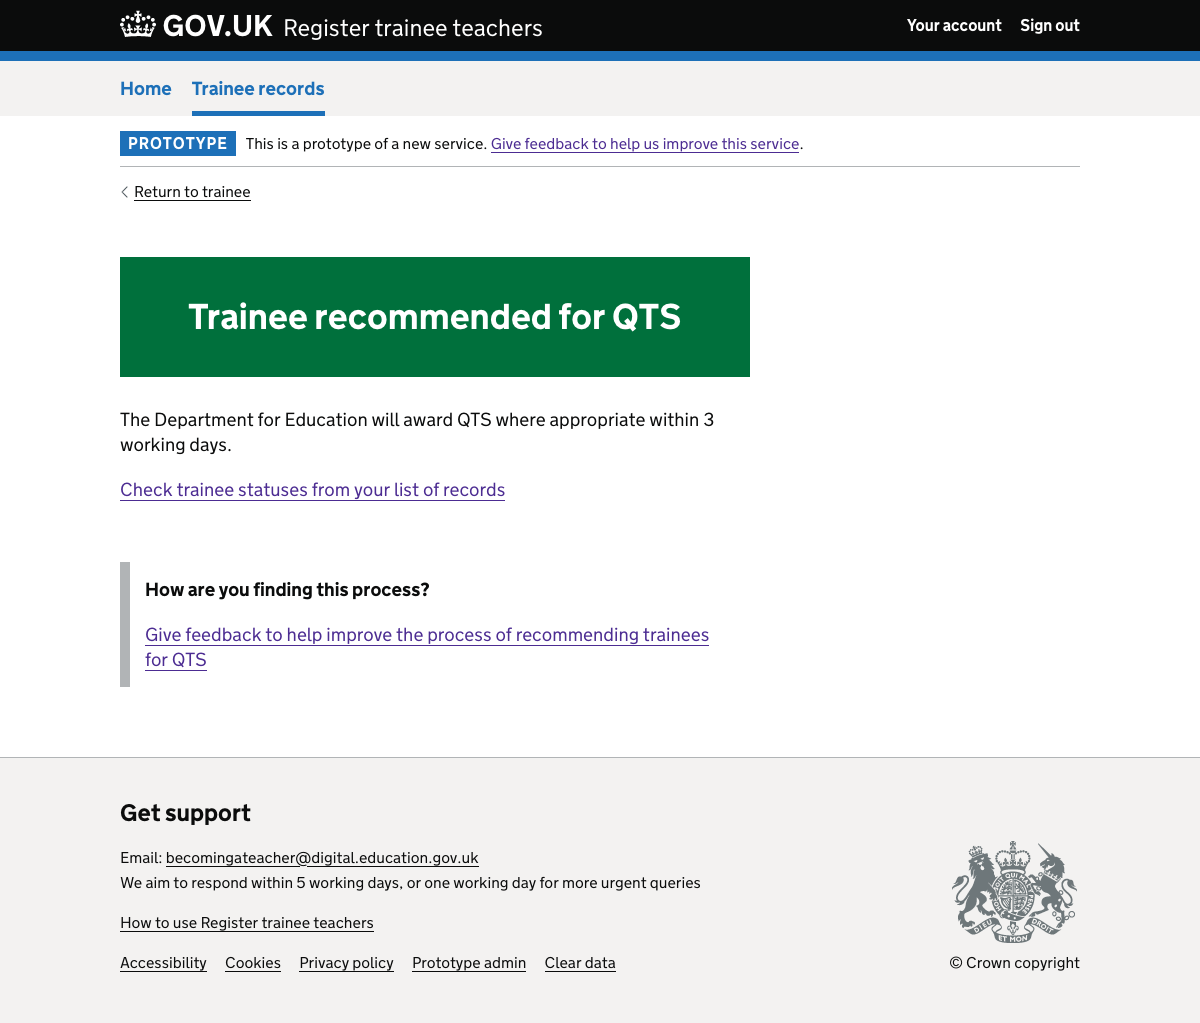 Screenshot of Trainee recommended for QTS